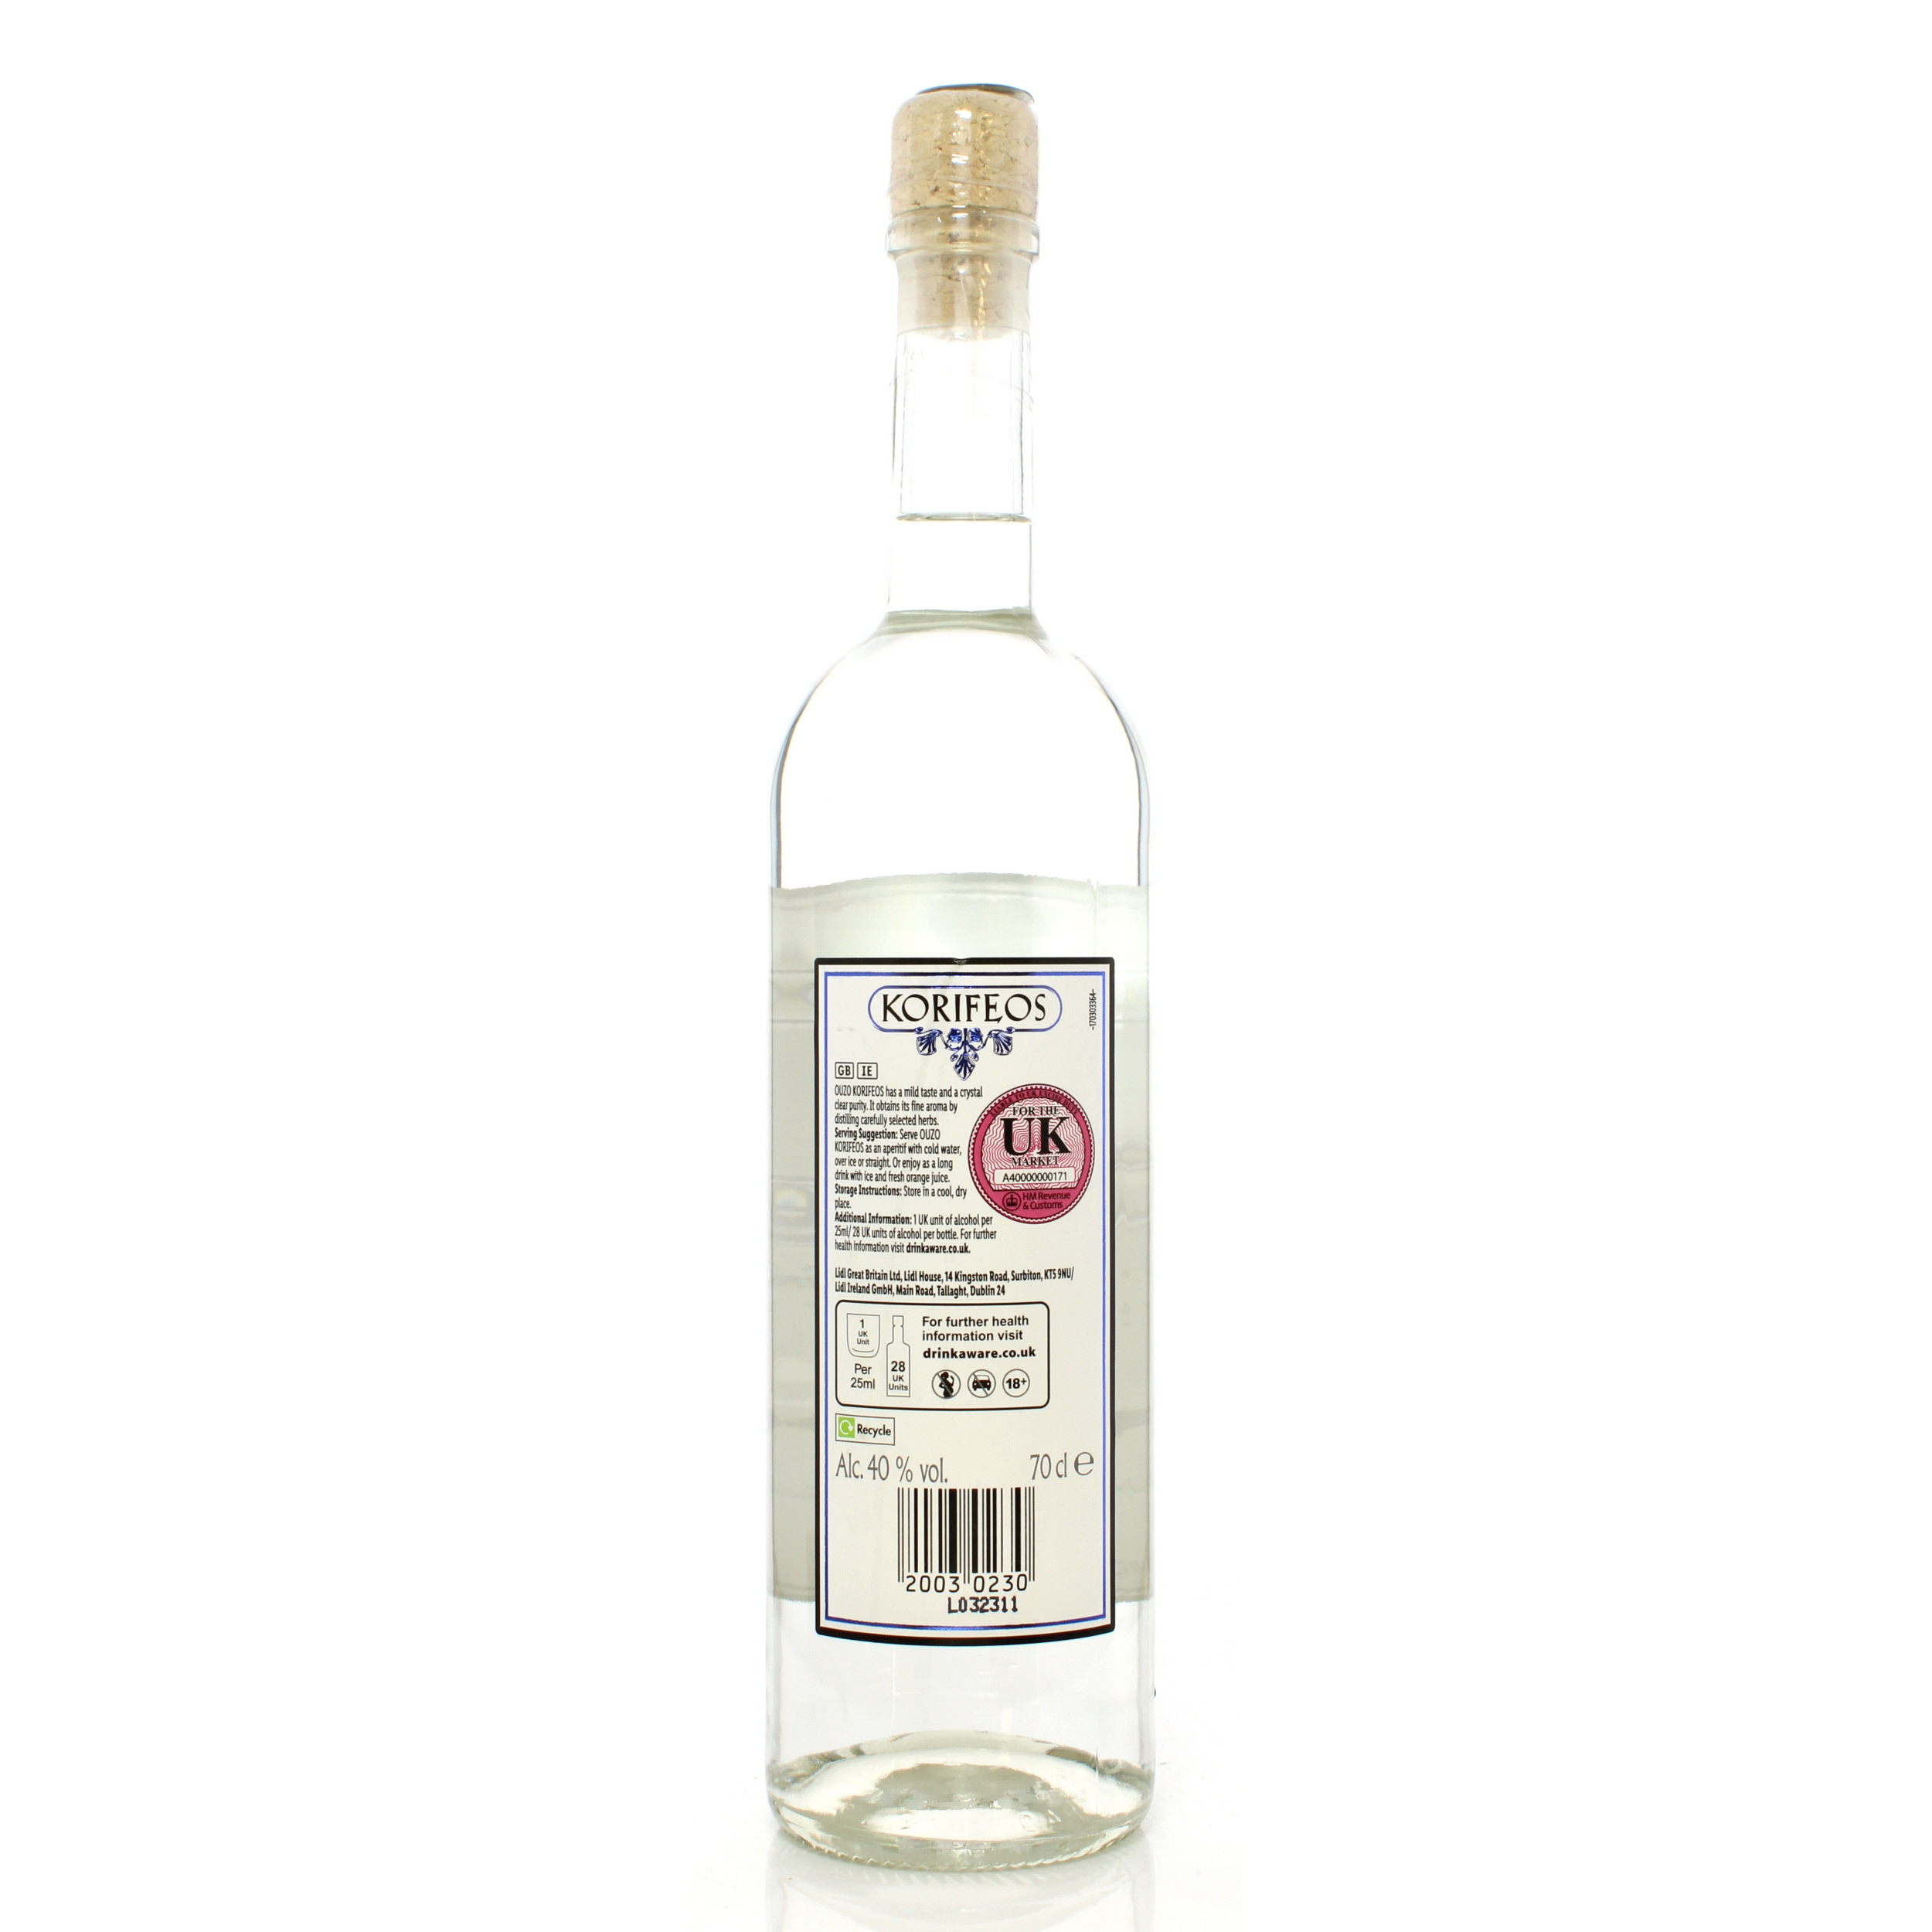 Korifeos Ouzo Auction A56203 | The Whisky Shop Auctions